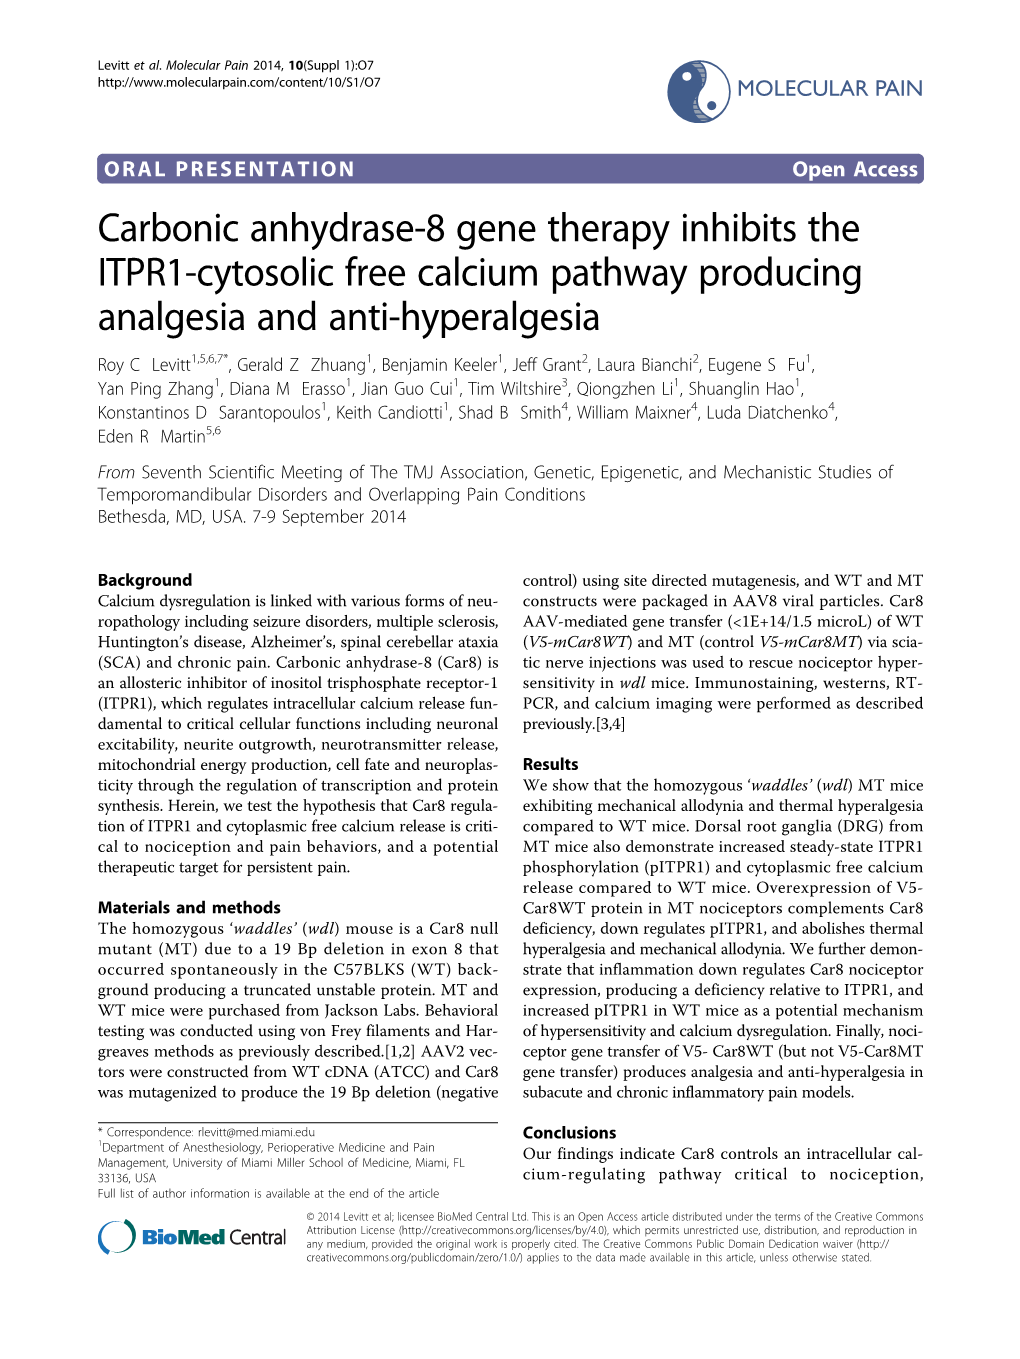 Carbonic Anhydrase-8 Gene Therapy Inhibits the ITPR1-Cytosolic Free